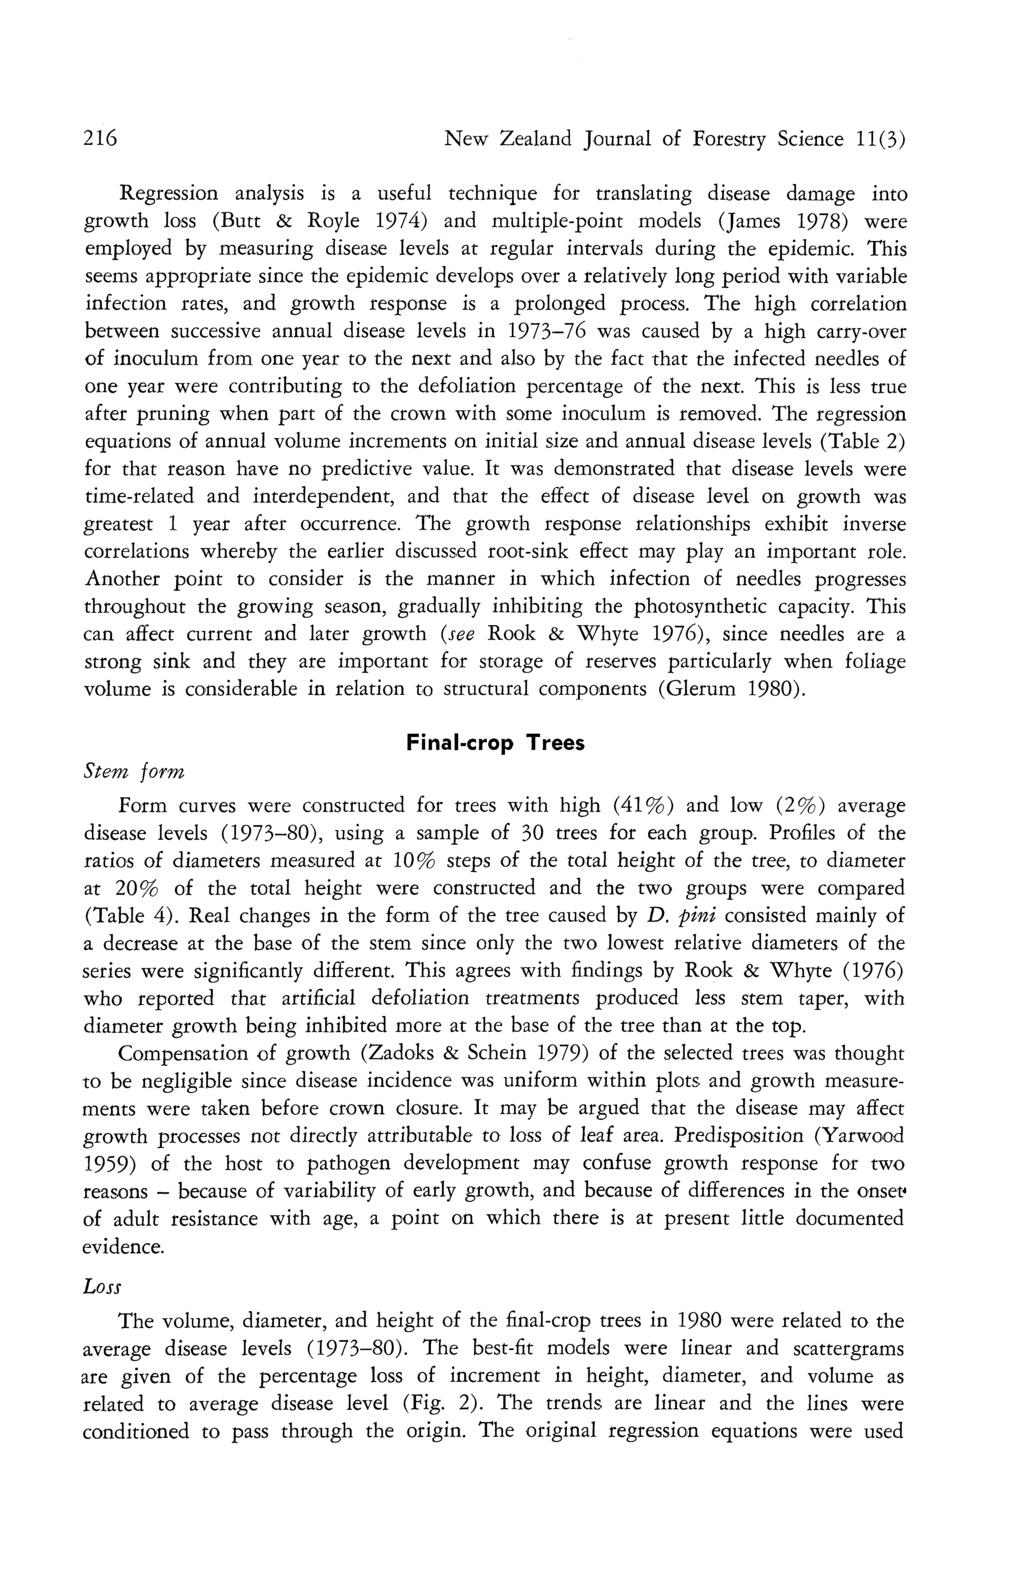 216 New Zealand Journal of Forestry Science 11(3) Regression analysis is a useful technique for translating disease damage into growth loss (Butt & Royle 1974) and multiple-point models (James 1978)